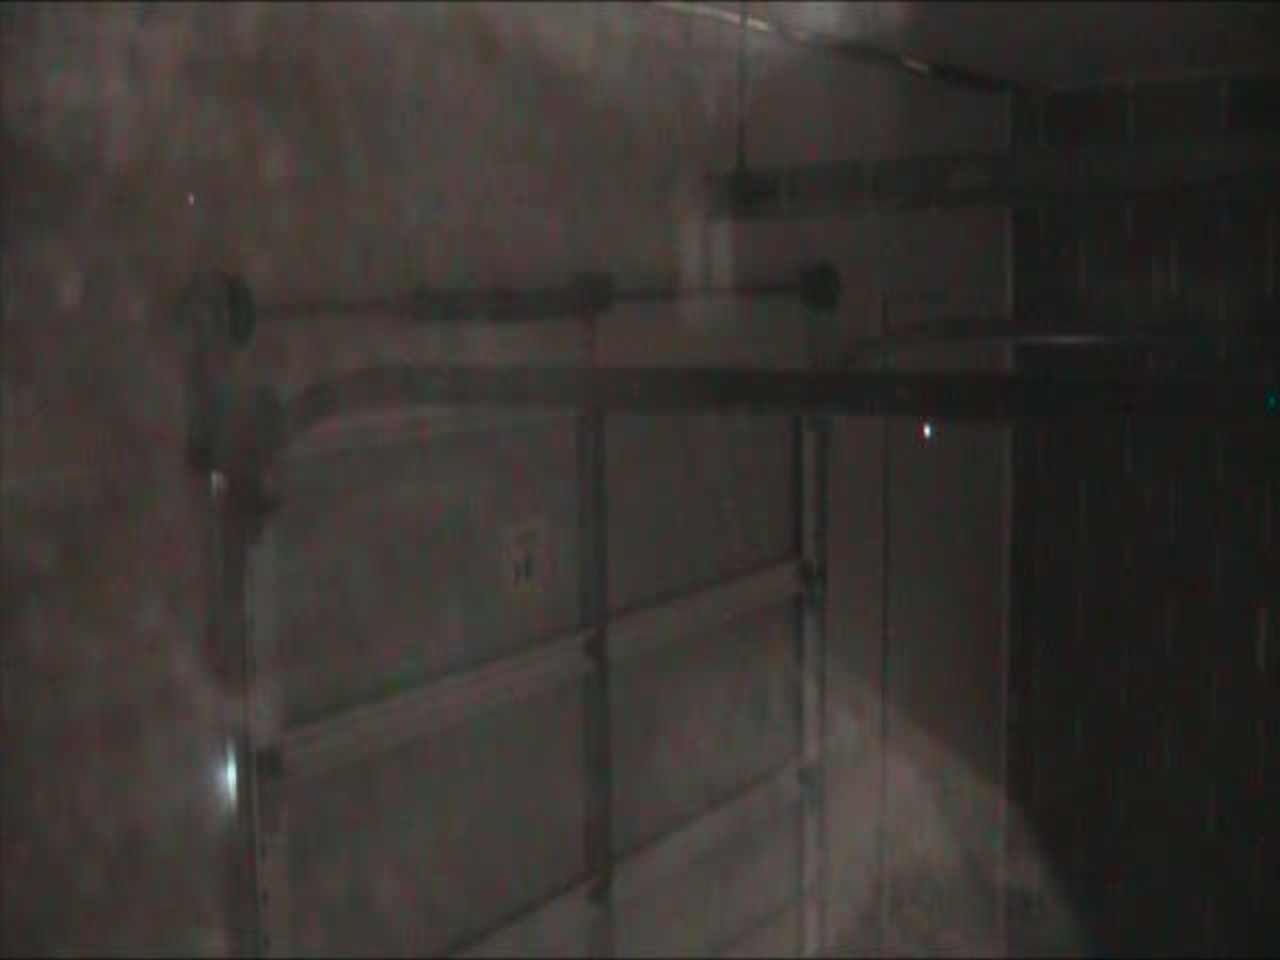 Test 11: Dispersion and Burning Behavior of Hydrogen Released in a Full-Scale Residential Garage in the Presence and Absence of Conventional Automobiles (View near garage door interior)